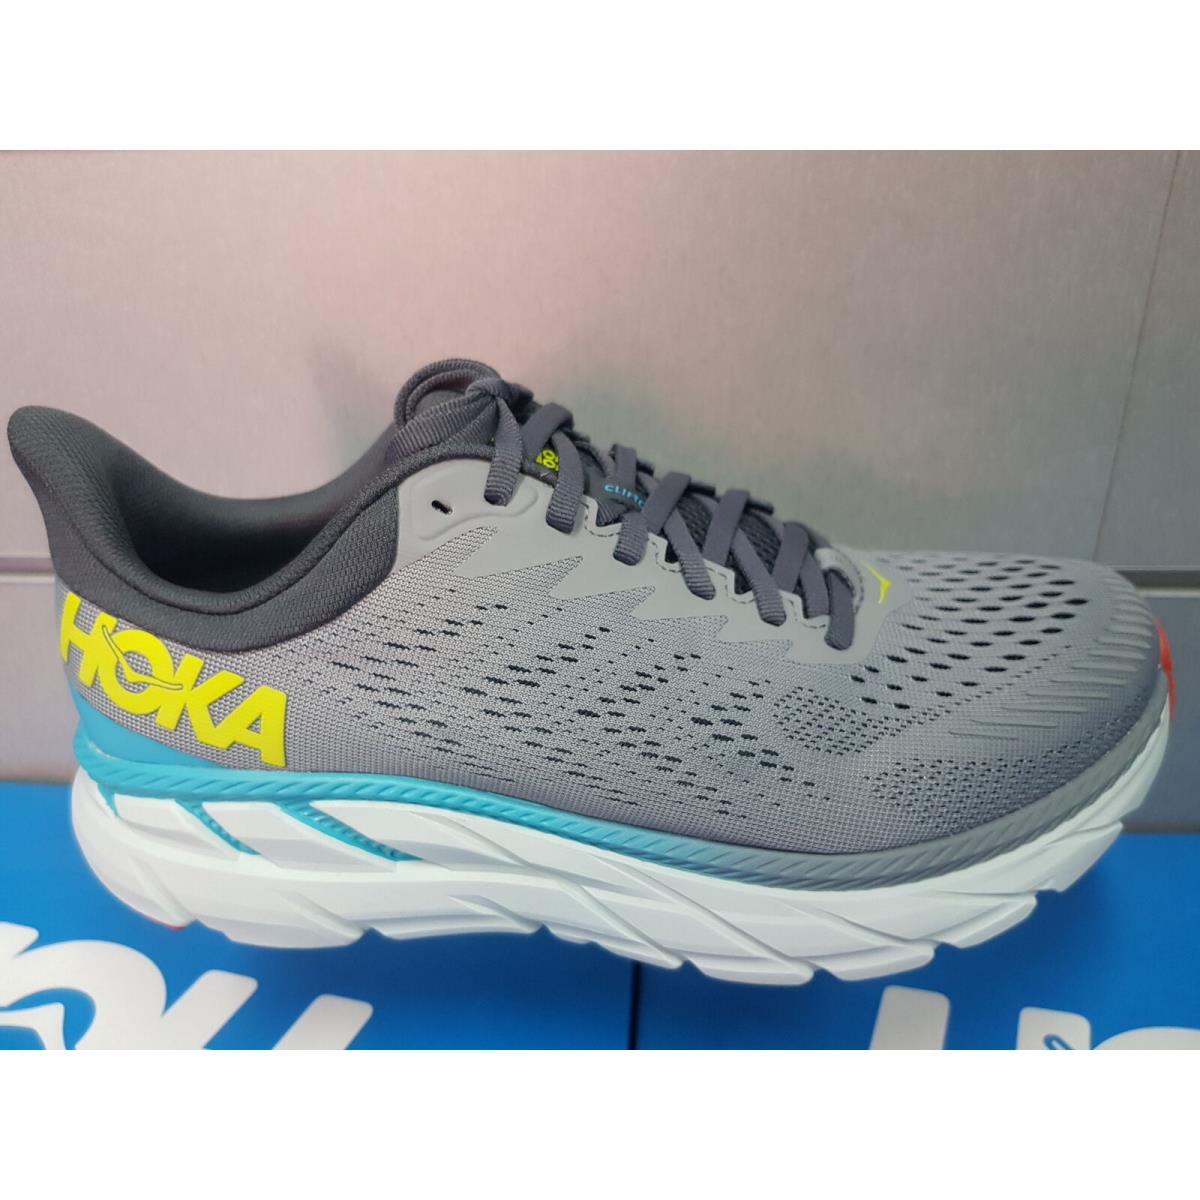 Hoka One One Clifton 7 1110508/WDDS Grey Running Shoes For Men`s